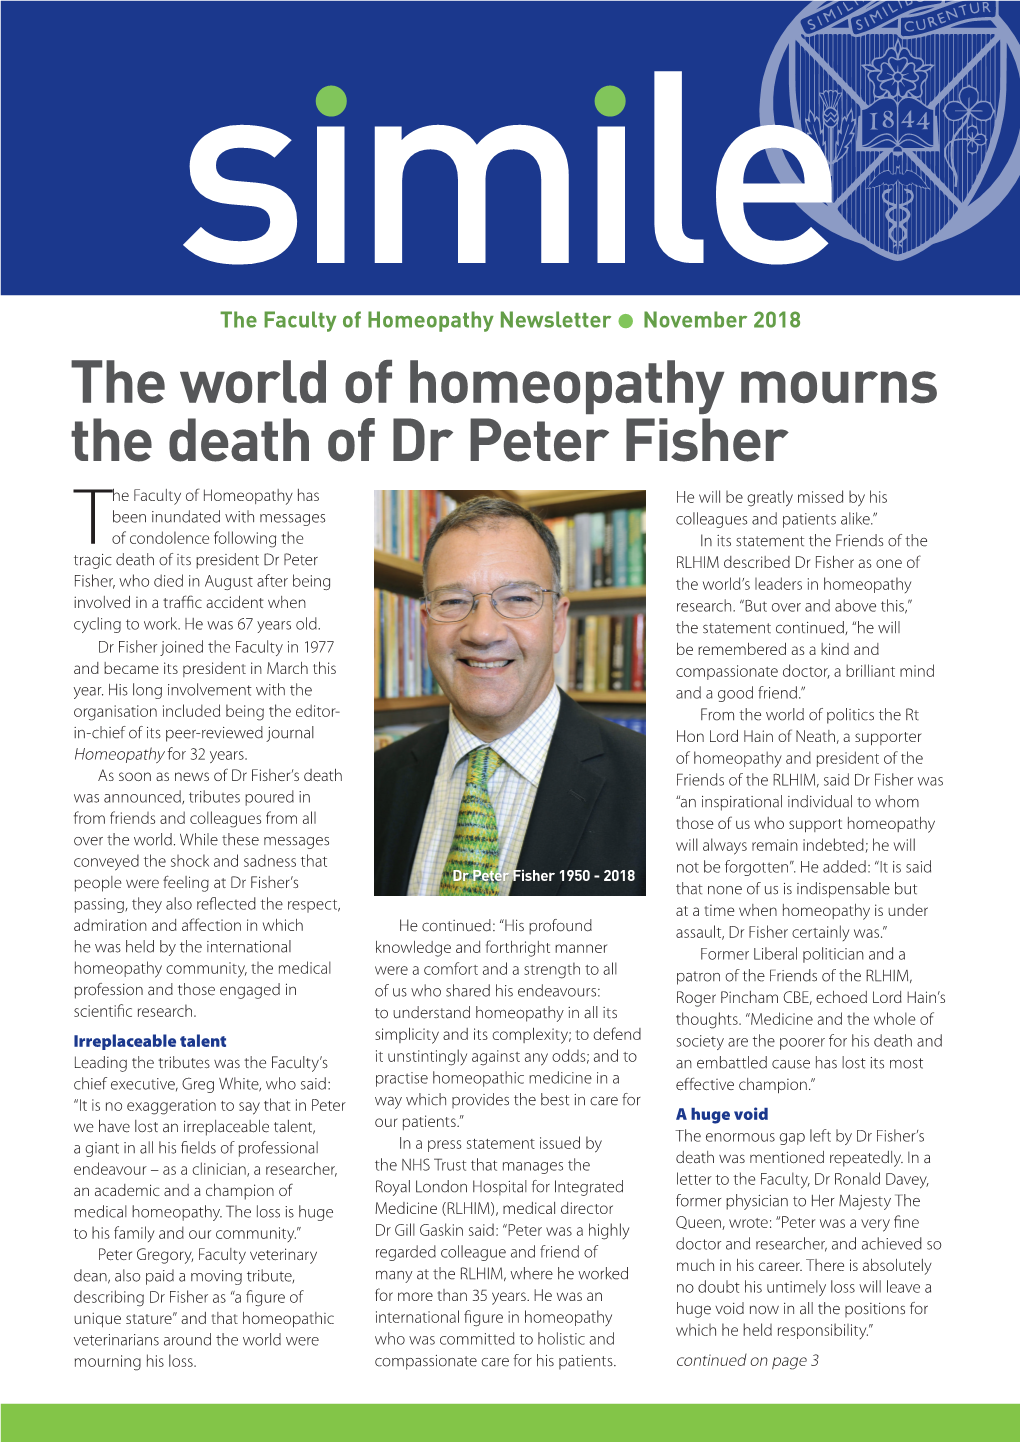 The World of Homeopathy Mourns the Death of Dr Peter Fisher